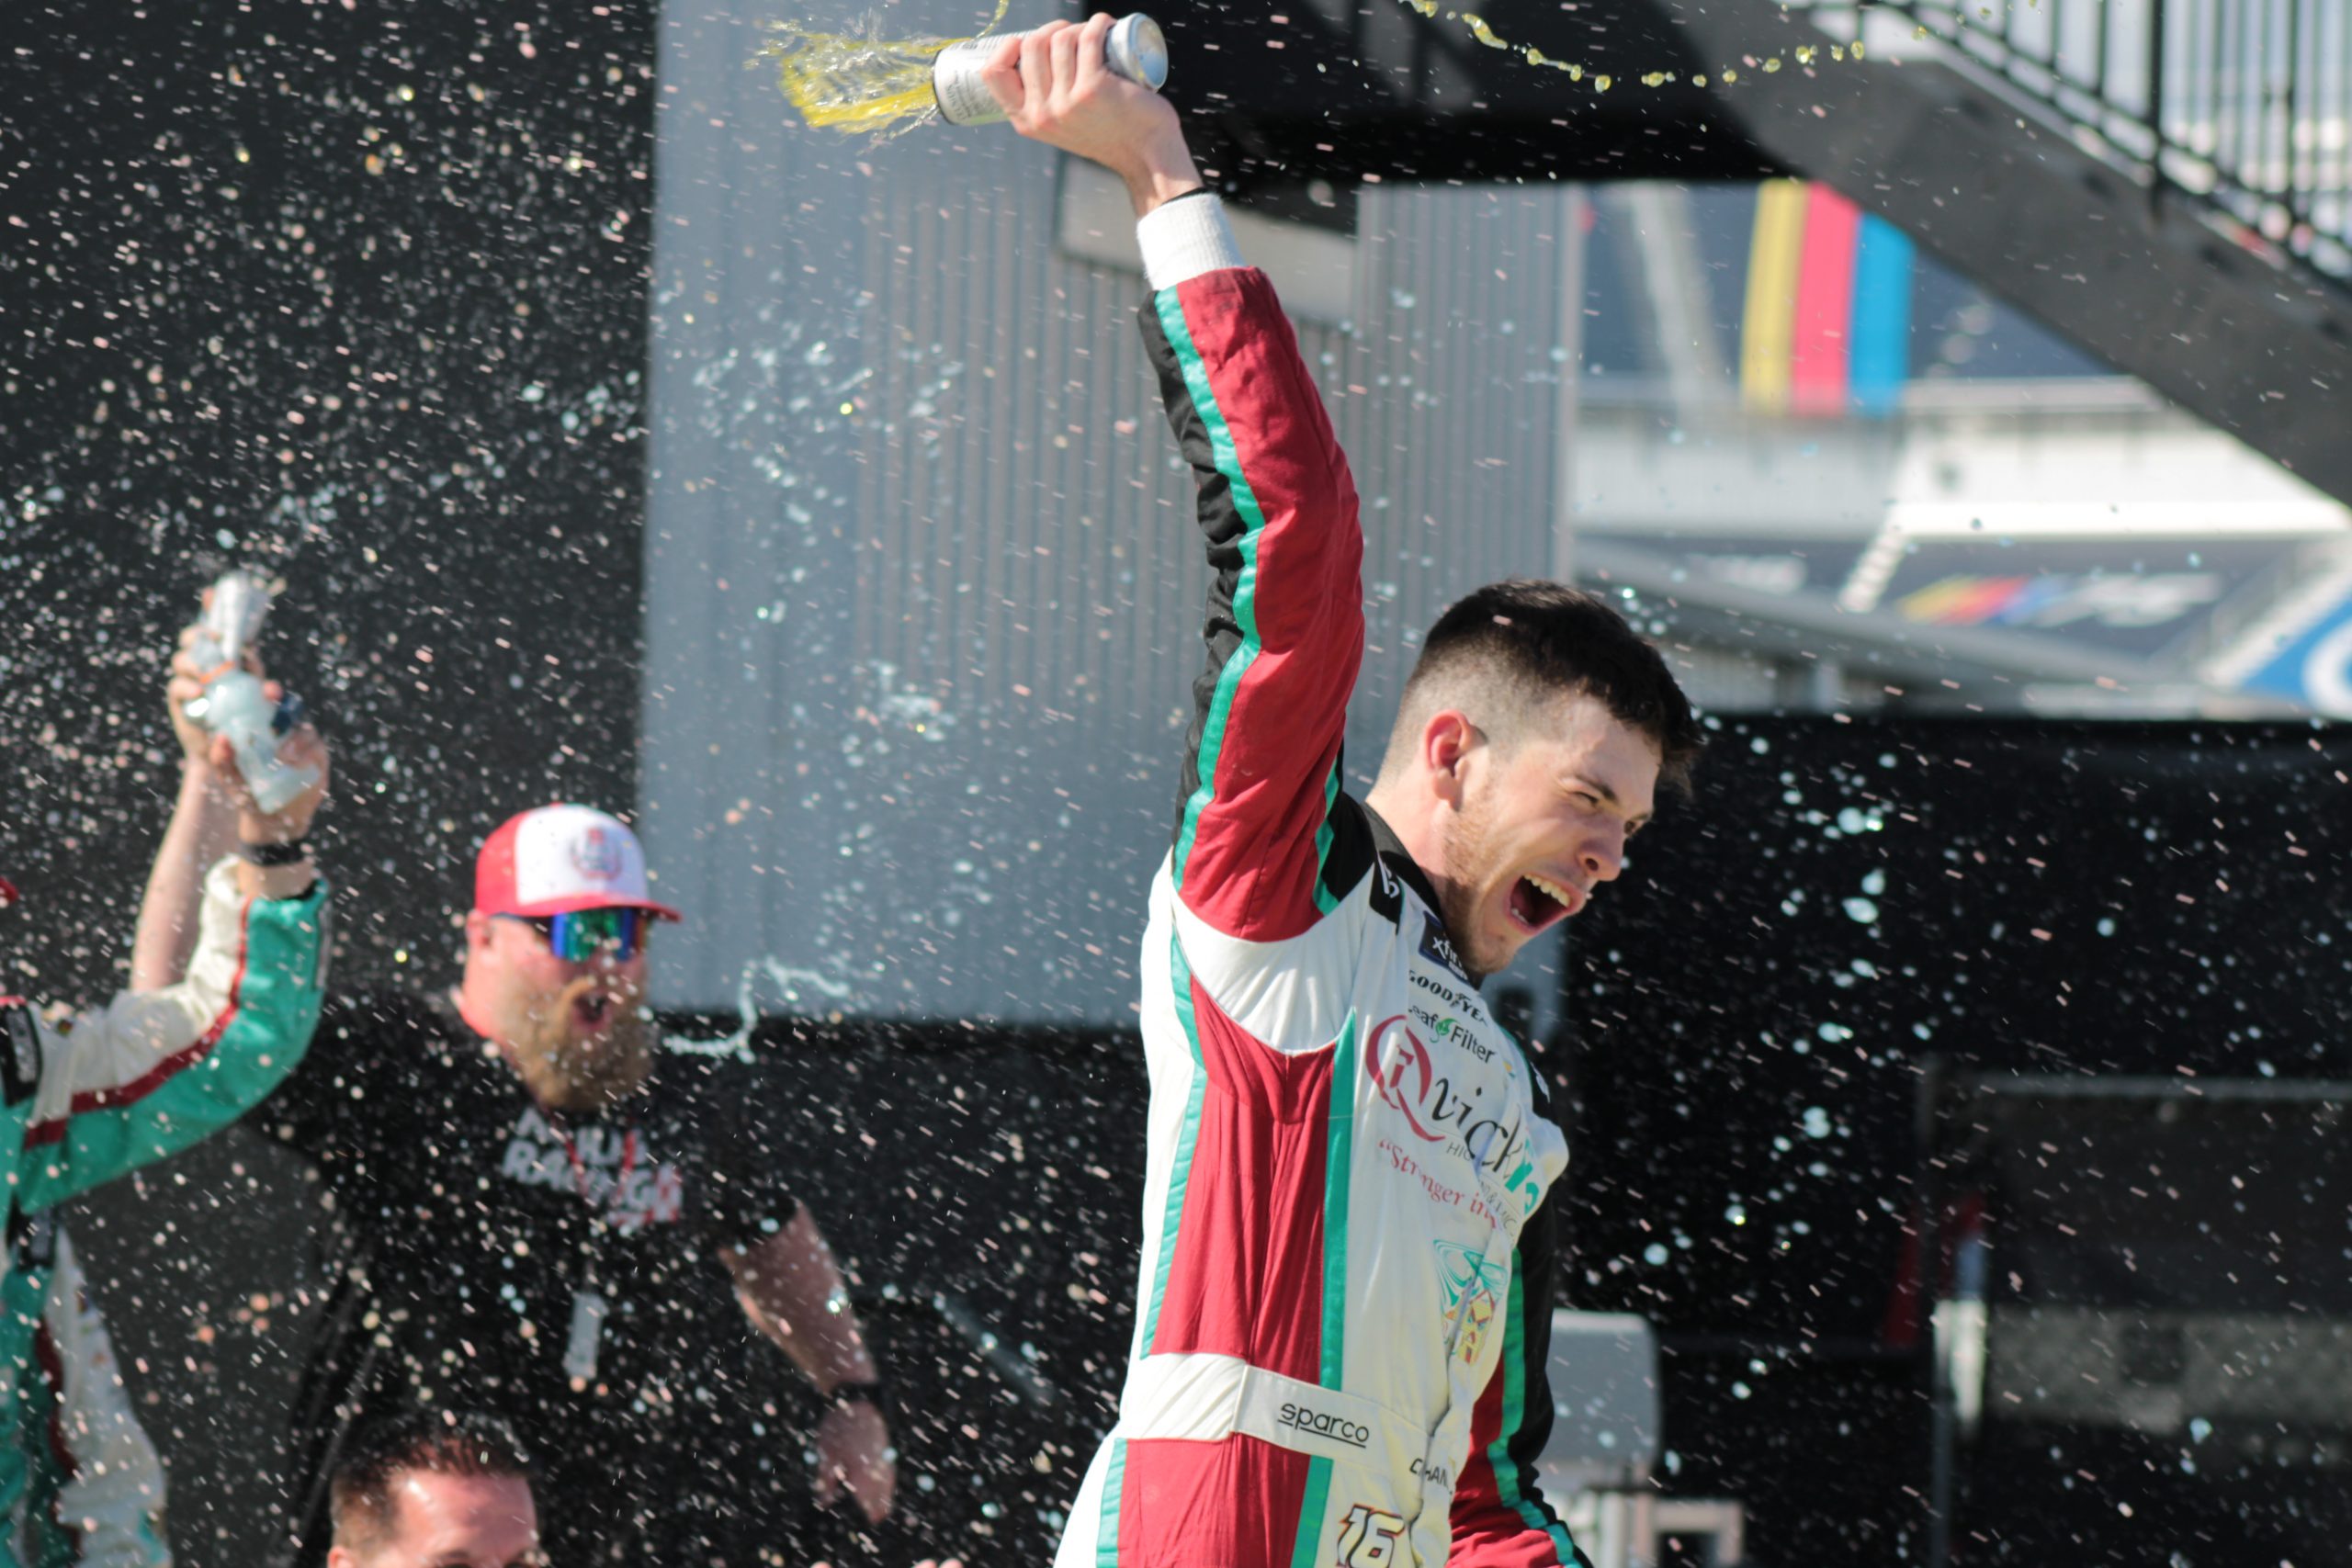 Chandler Smith scored his first career NASCAR Xfinity Series race win on Saturday at Richmond Raceway. (Photo: Trish McCormack | The Podium Finish)